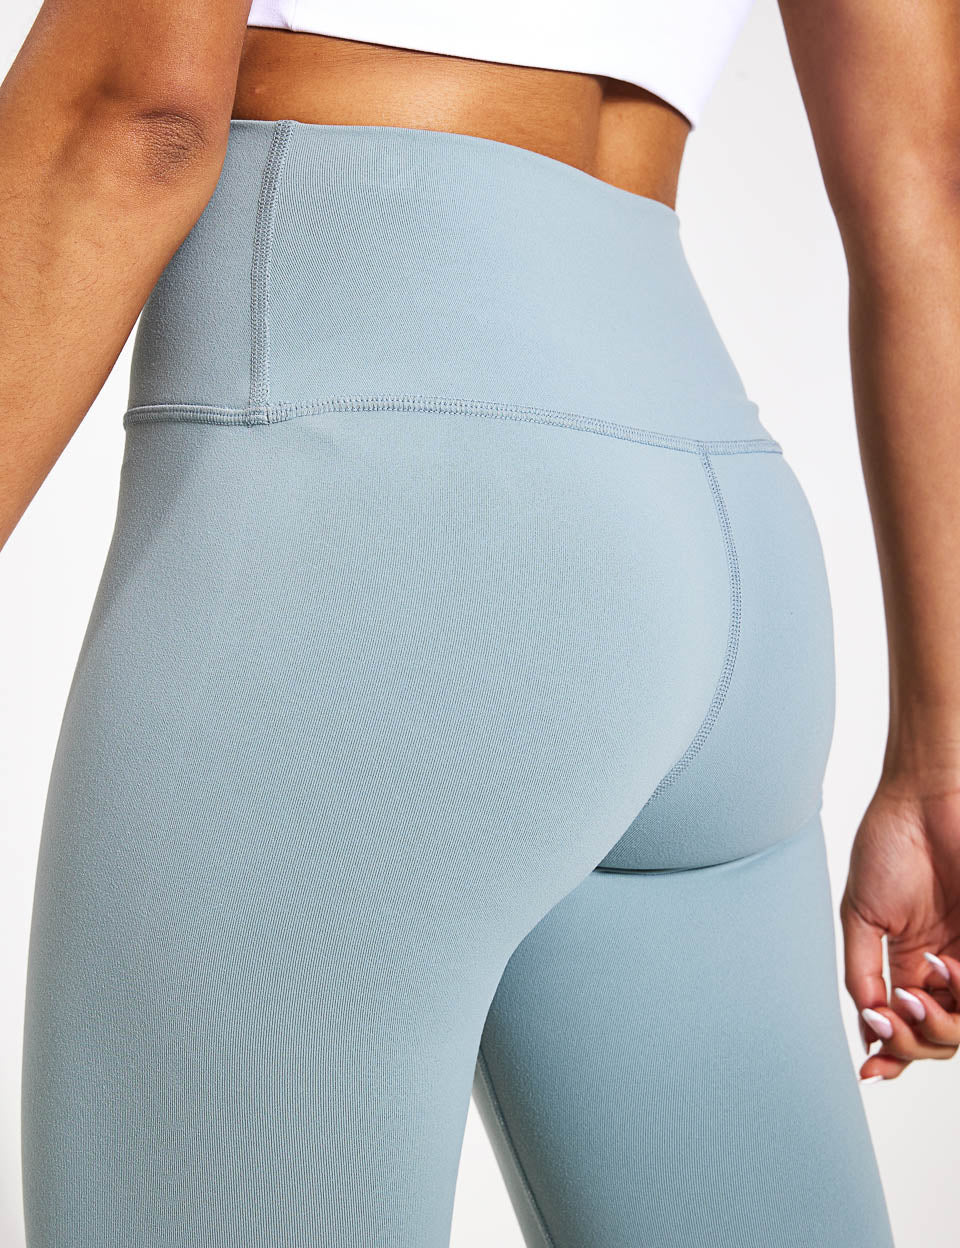 7/8 High-Waist Airbrush Legging in Steel Blue by Alo Yoga - Work Well Daily